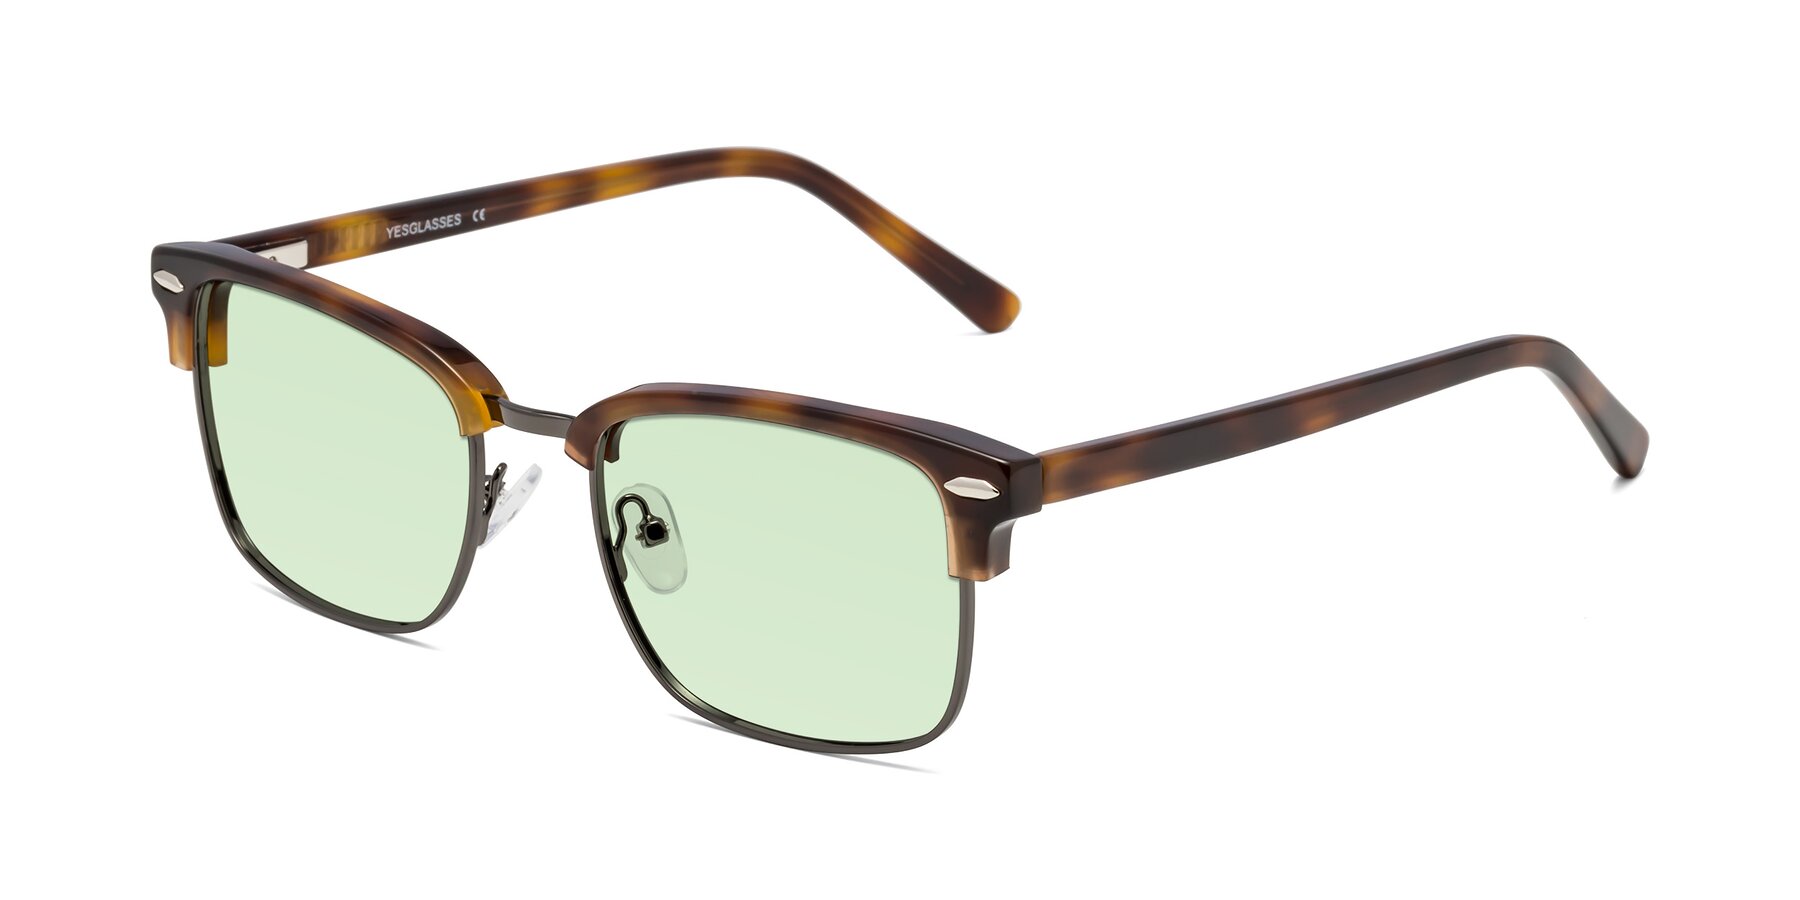 Angle of 17464 in Tortoise/ Gunmetal with Light Green Tinted Lenses